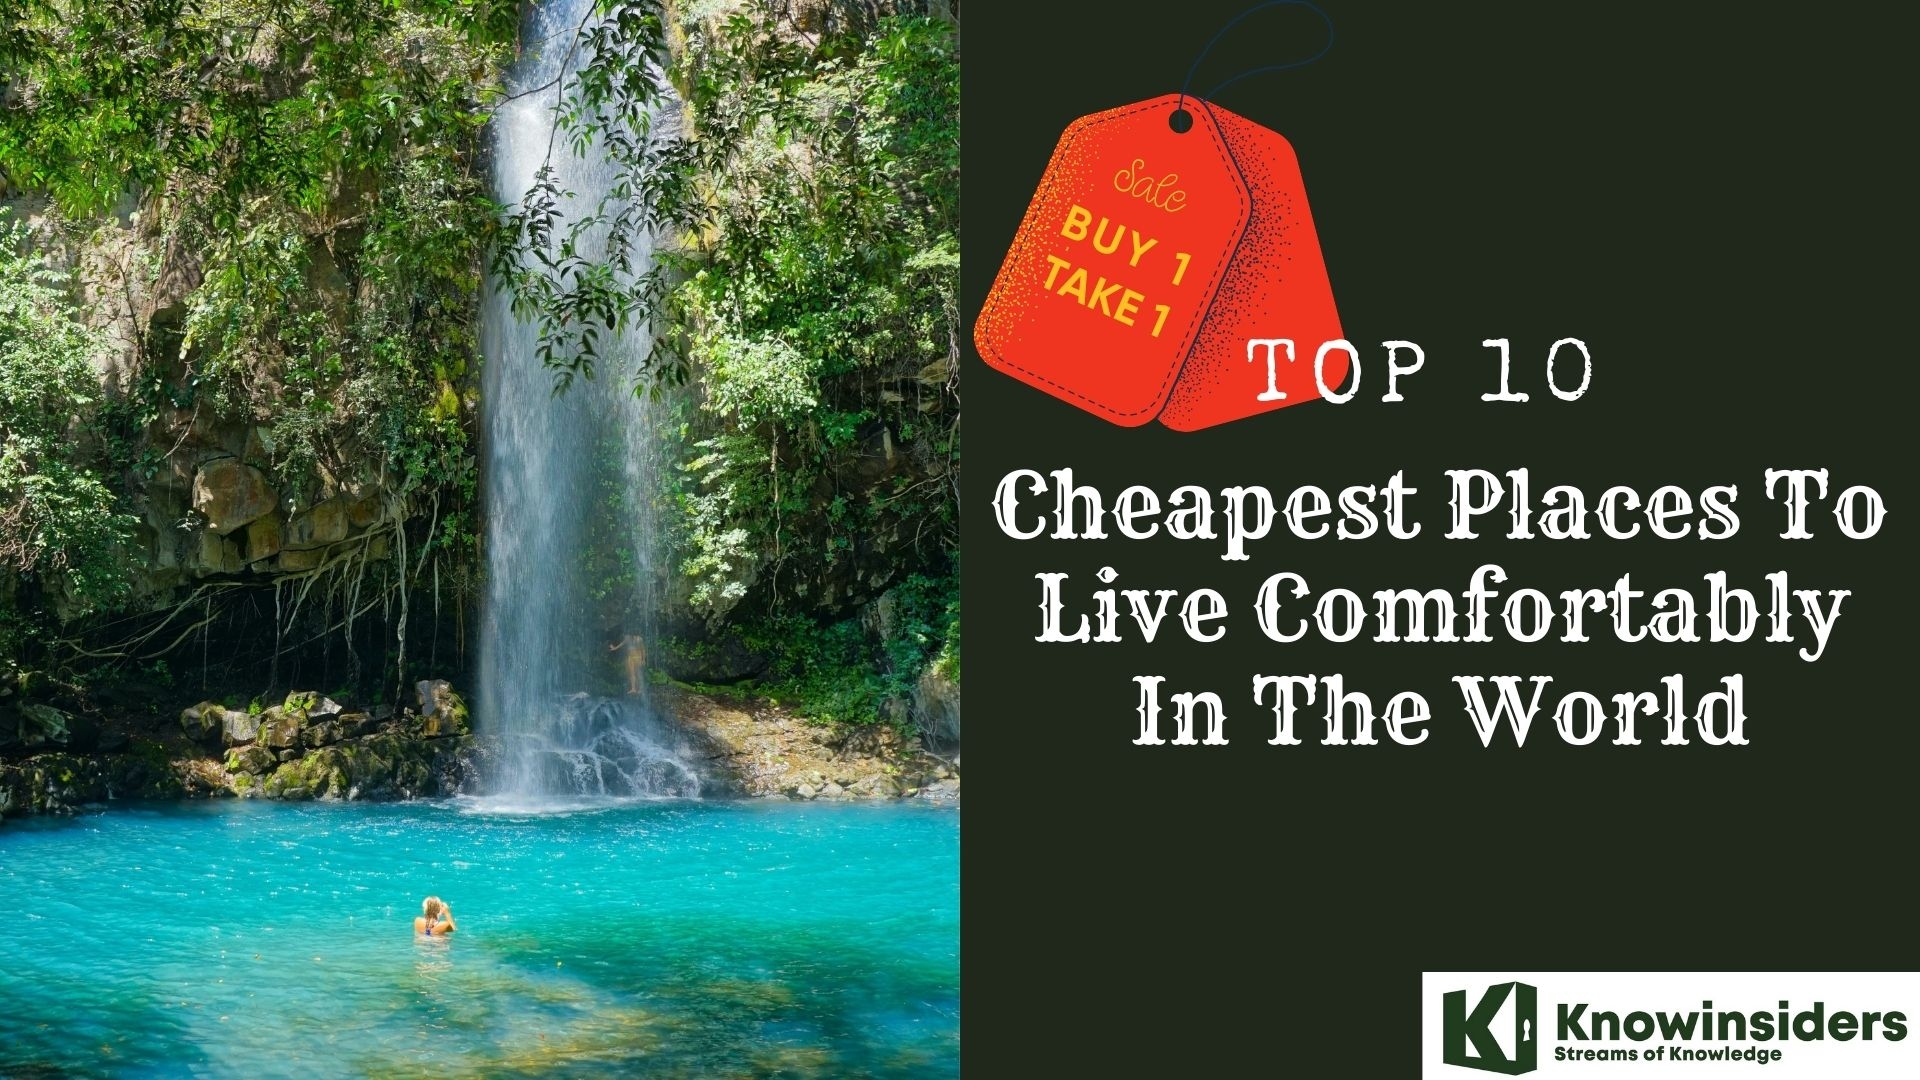 Top 10 Cheapest Places To Live Comfortably In The World